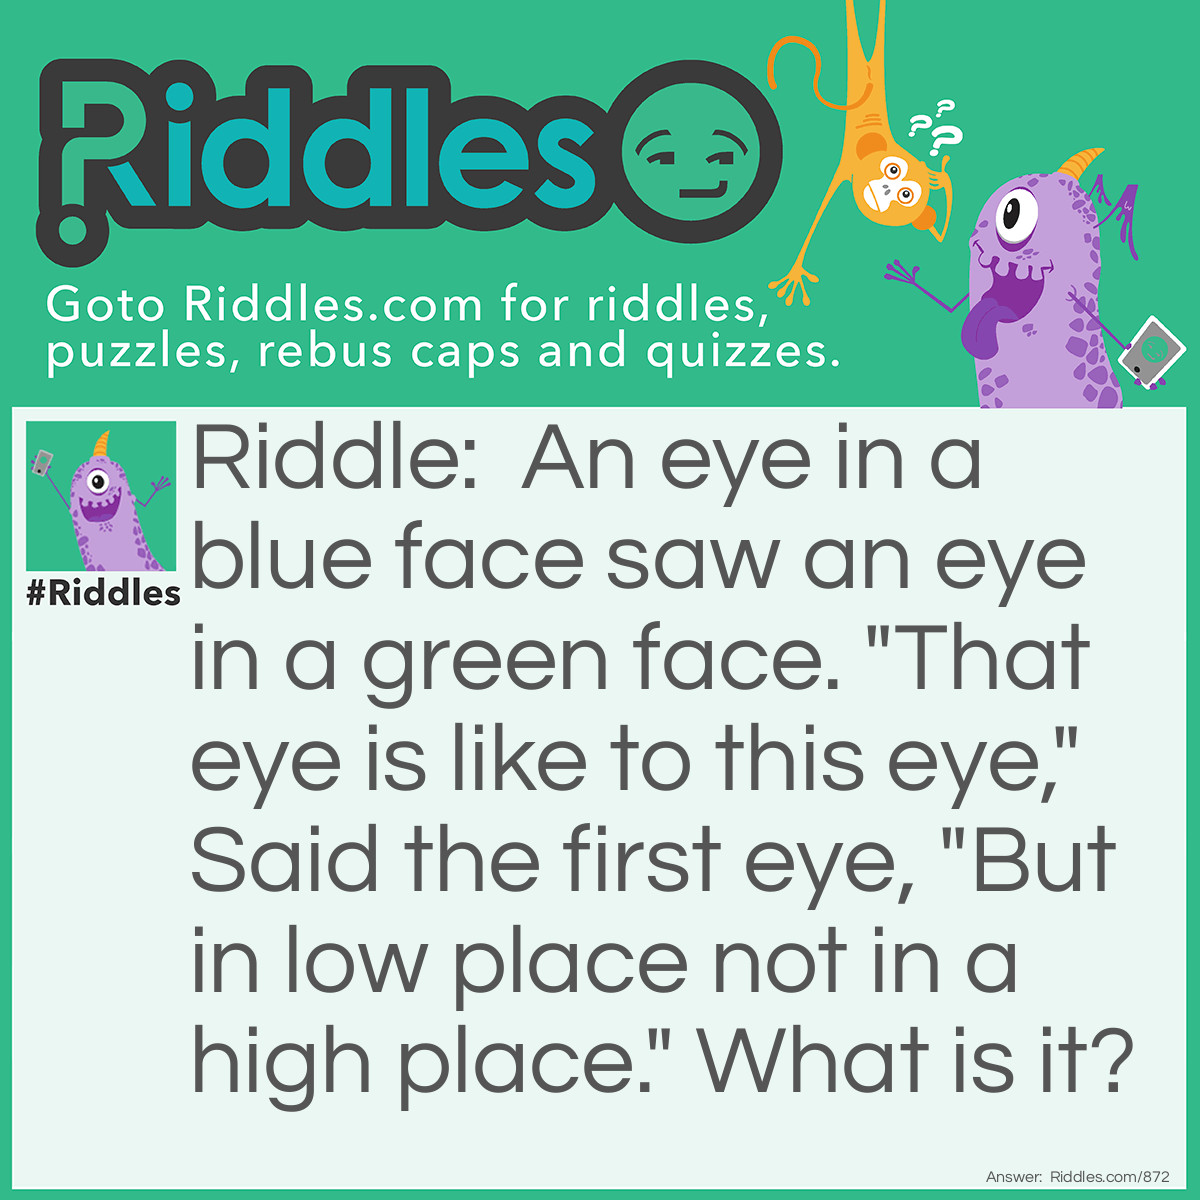 Riddle: An eye in a blue face saw an eye in a green face. "That eye is like to this eye," Said the first eye, "But in low place not in a high place." What is it? Answer: The sun on the daisies.